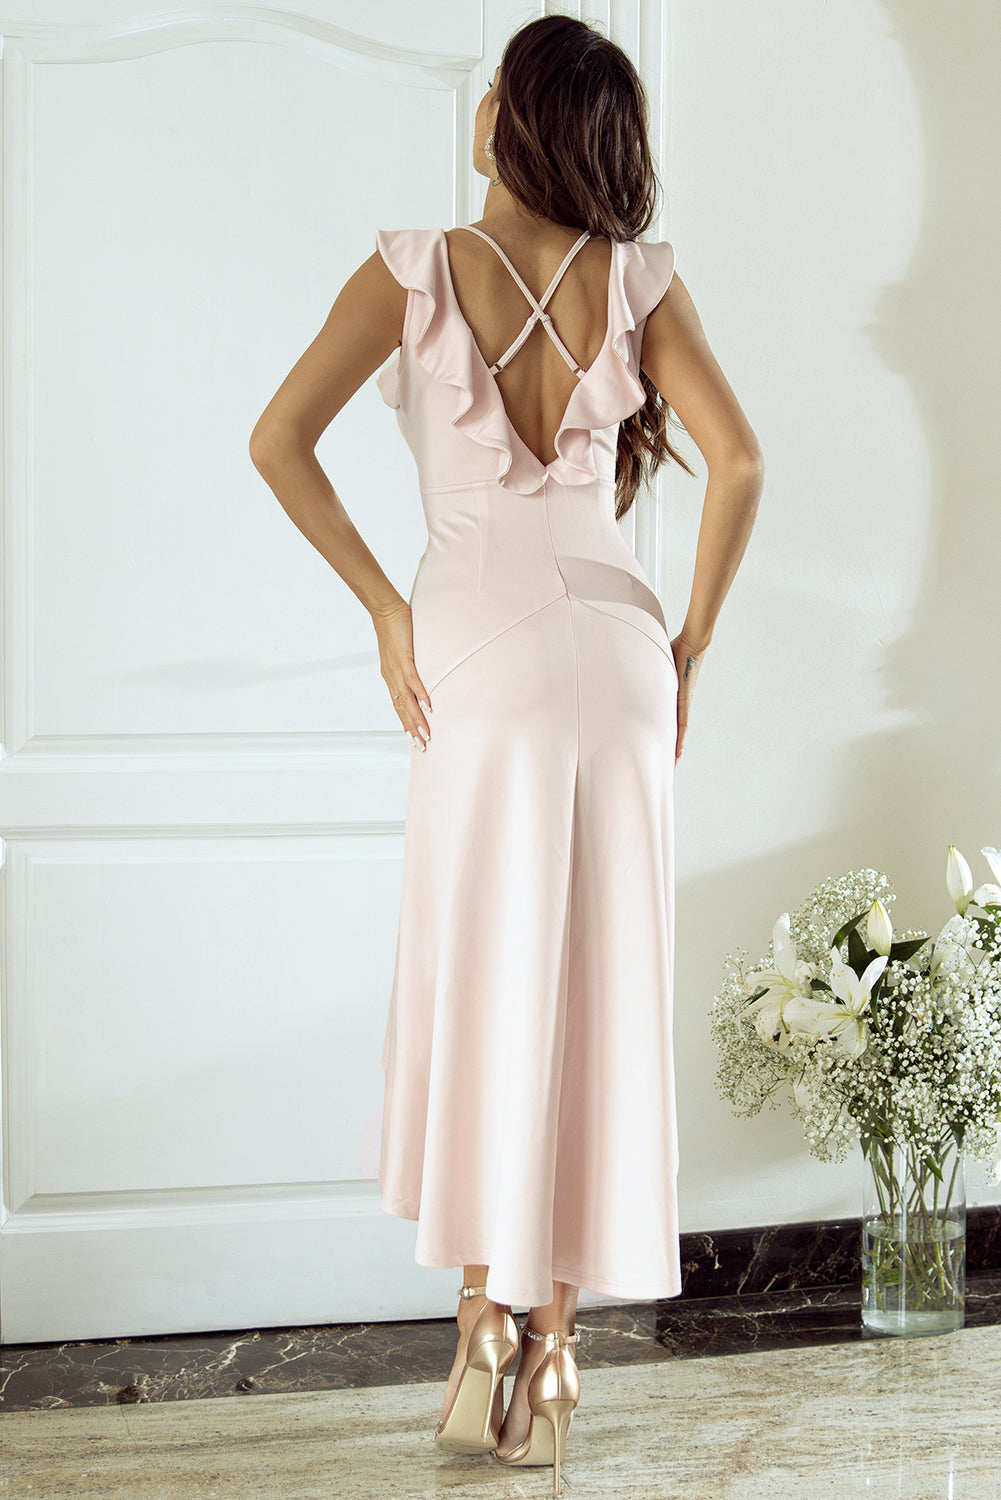 Blue Zone Planet |  Apricot Pink Crossed Backless Mermaid Trim Wedding Party Dress Blue Zone Planet